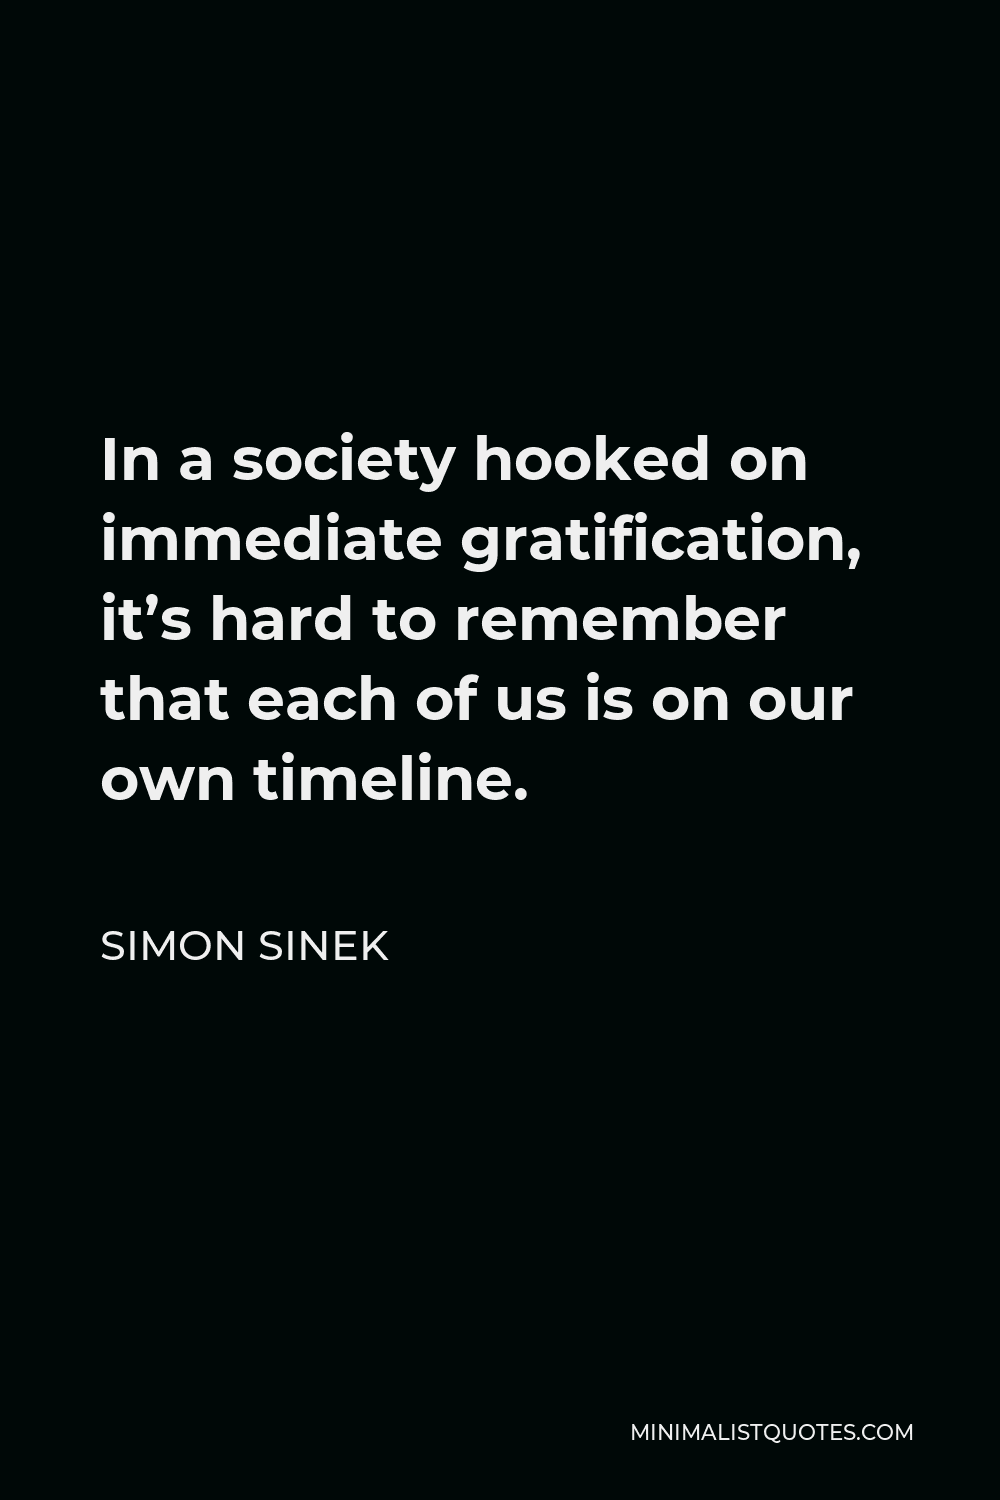 Simon Sinek Quote - In a society hooked on immediate gratification, it’s hard to remember that each of us is on our own timeline.